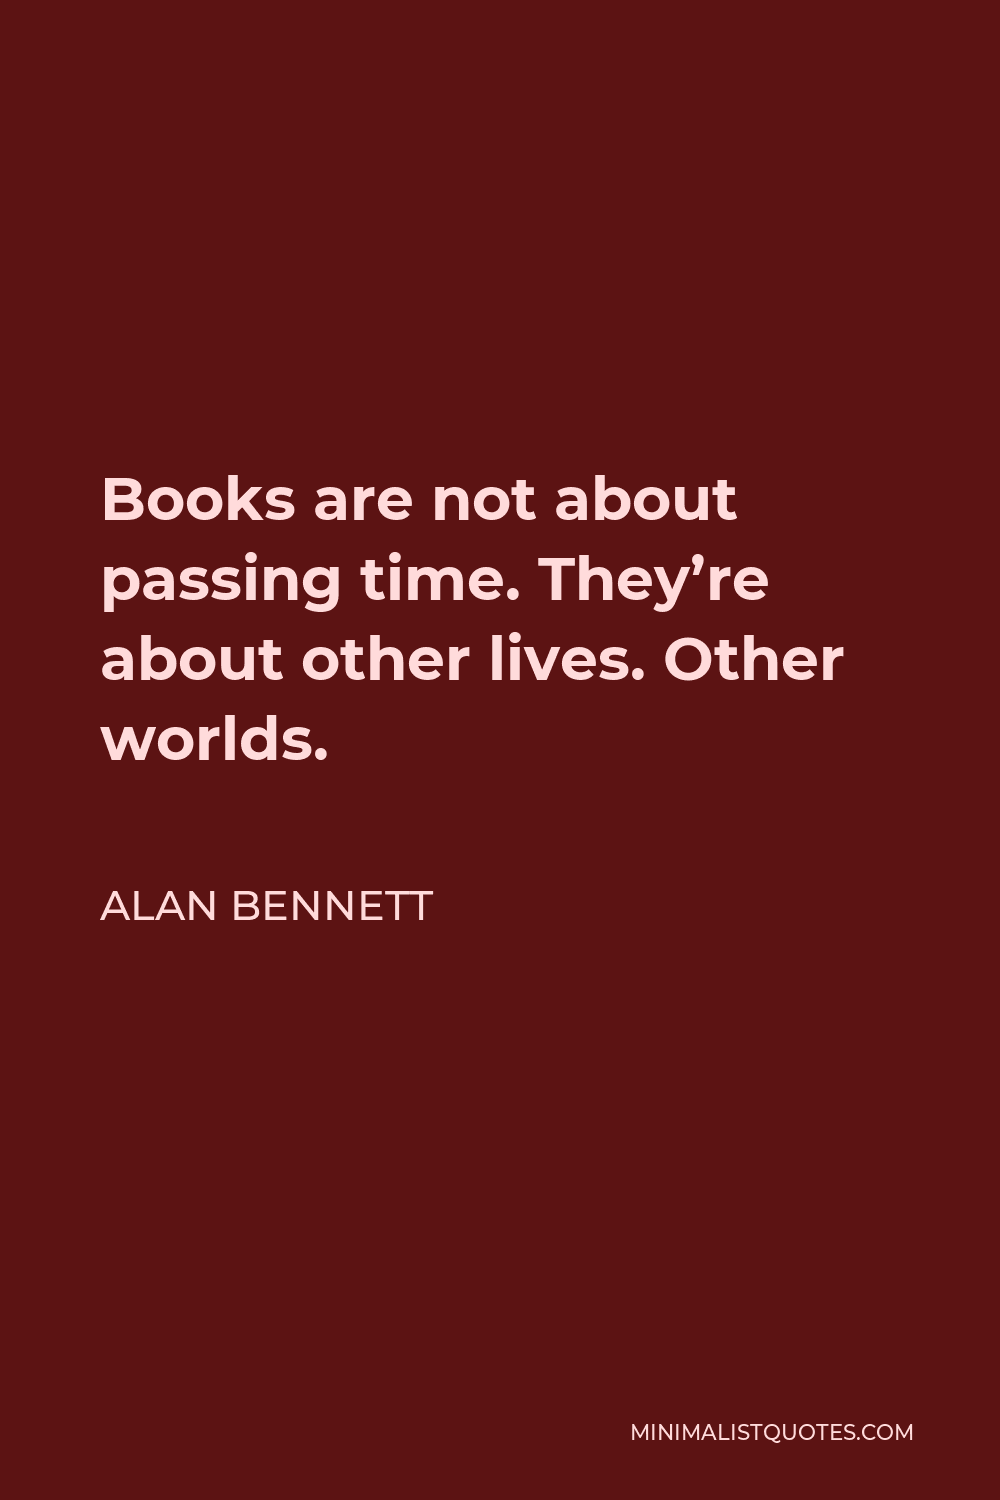 Alan Bennett Quote - Books are not about passing time. They’re about other lives. Other worlds.